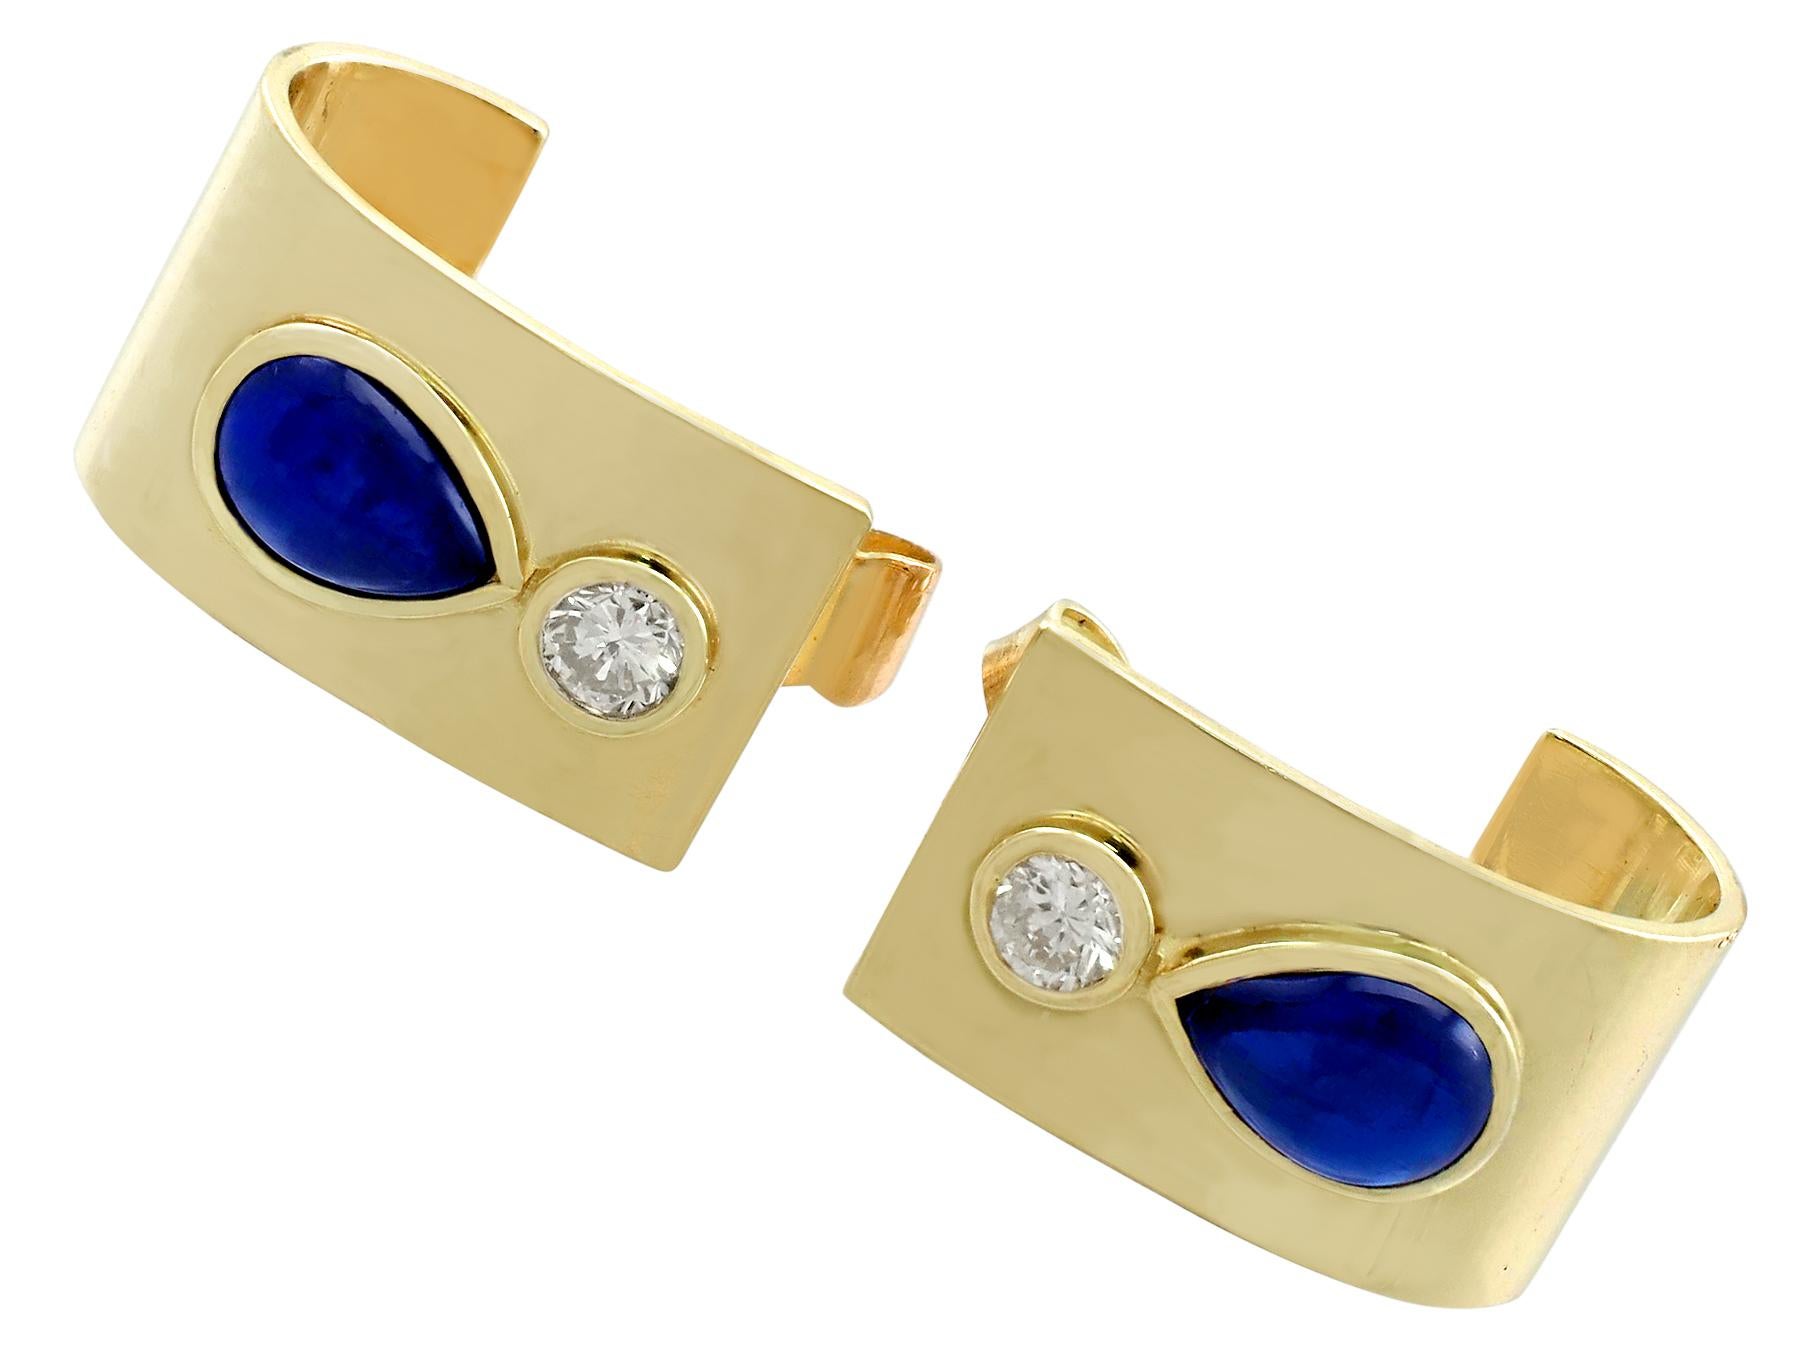 An impressive pair of vintage 2.50 carat sapphire and 0.18 carat diamond, 14 karat yellow gold earrings; part of our diverse sapphire jewelry collections.

These fine and impressive vintage sapphire earrings have been crafted in 14k yellow